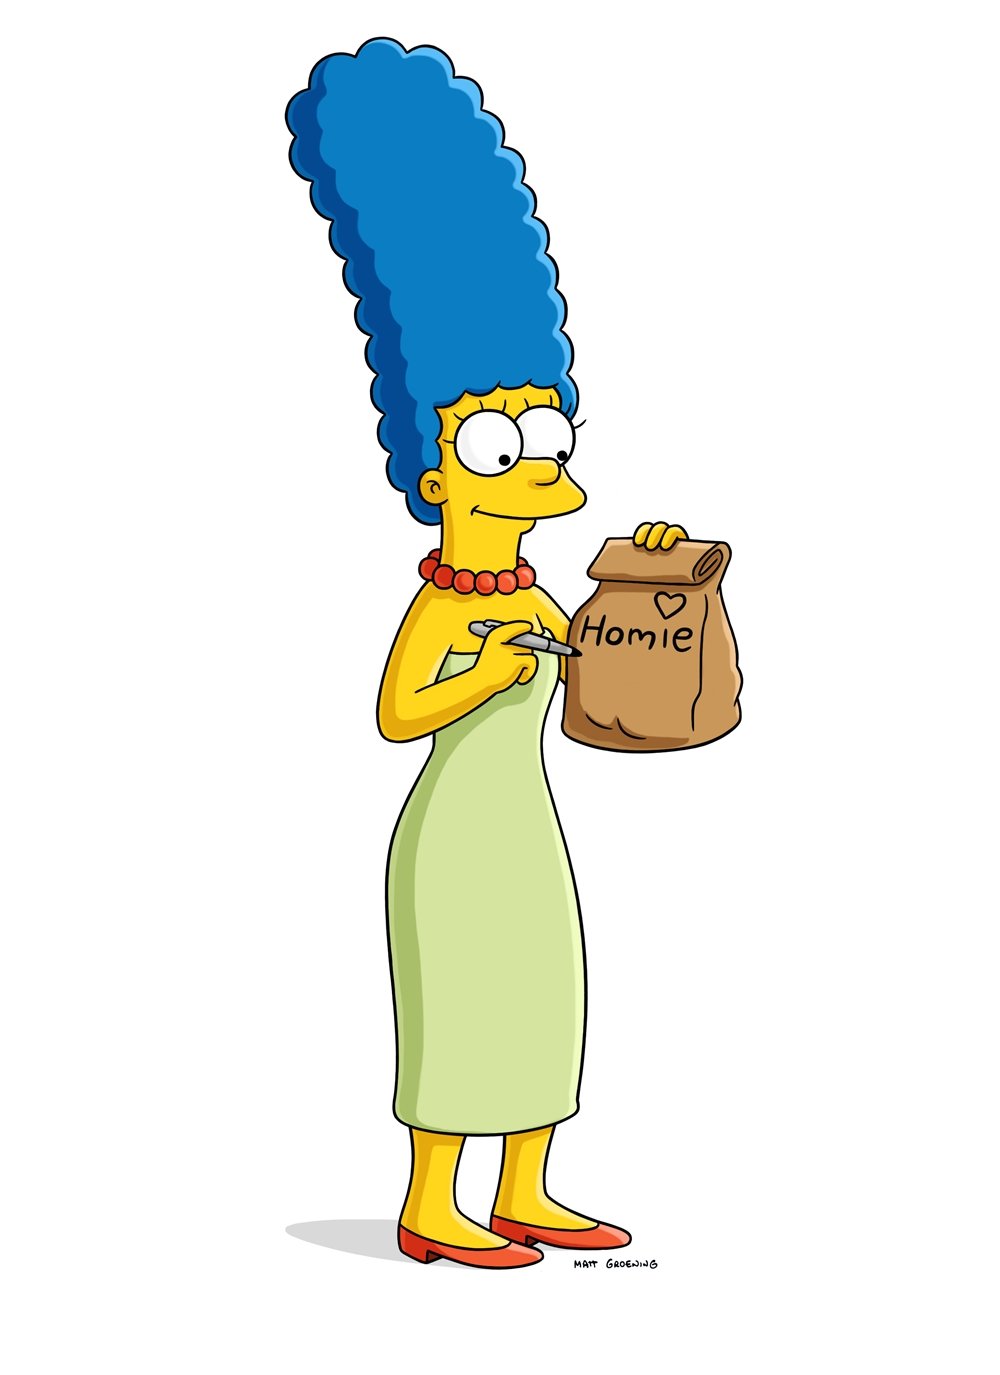 The Simpsons Character Marge Simpson Attends The Simp 